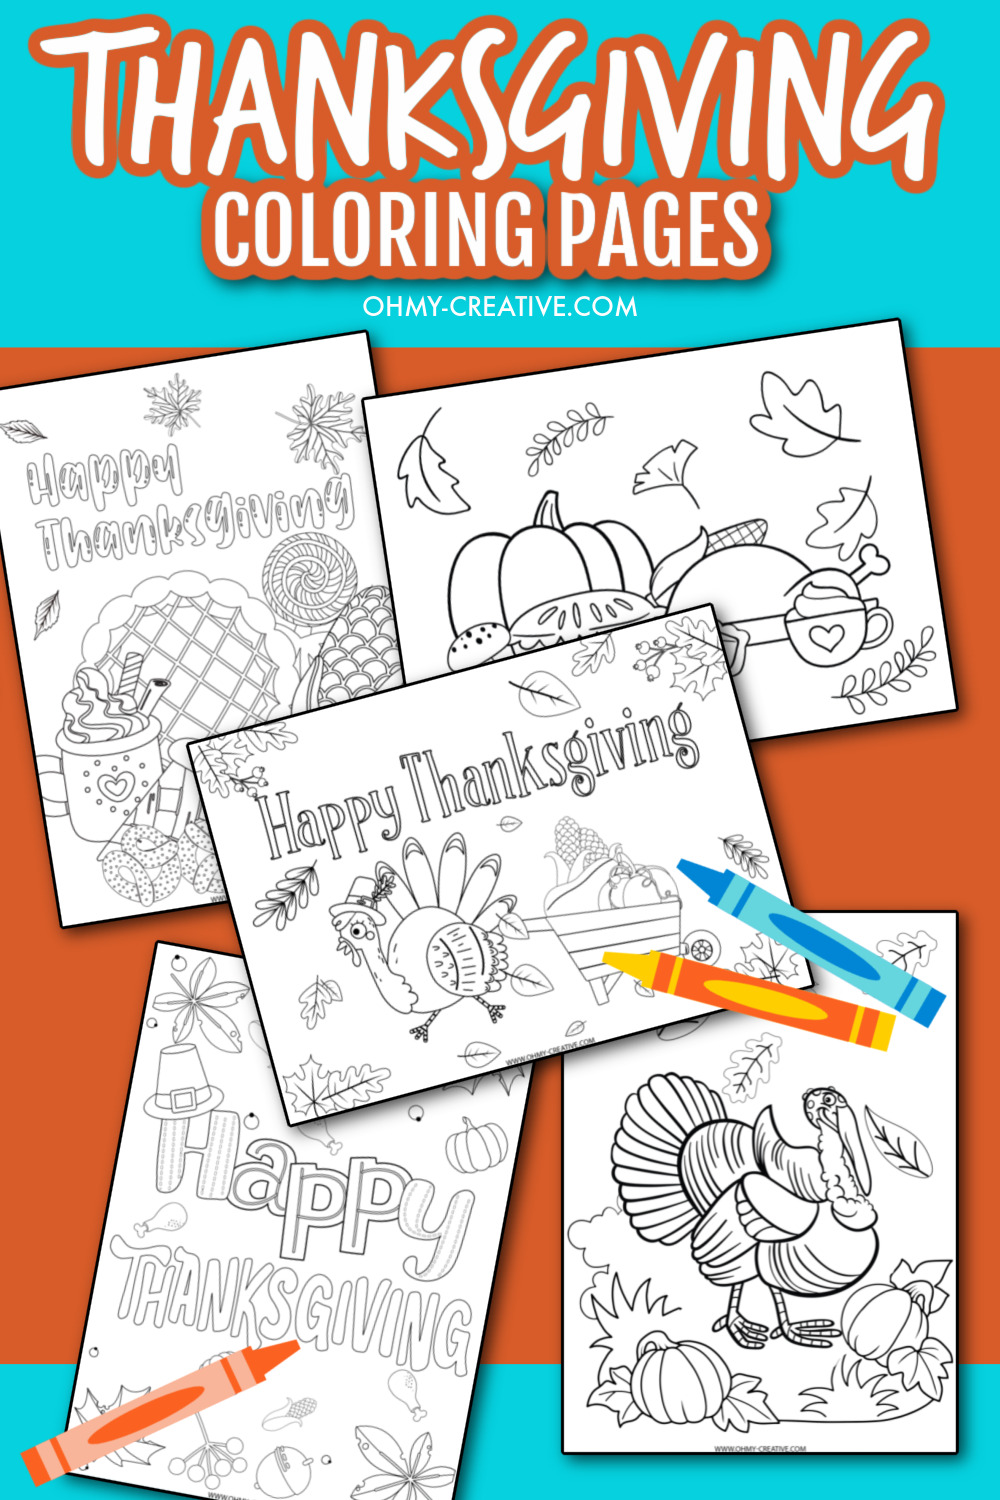 Thanksgiving coloring page collage of 5 Thanksgiving coloring sheets on an orange background.